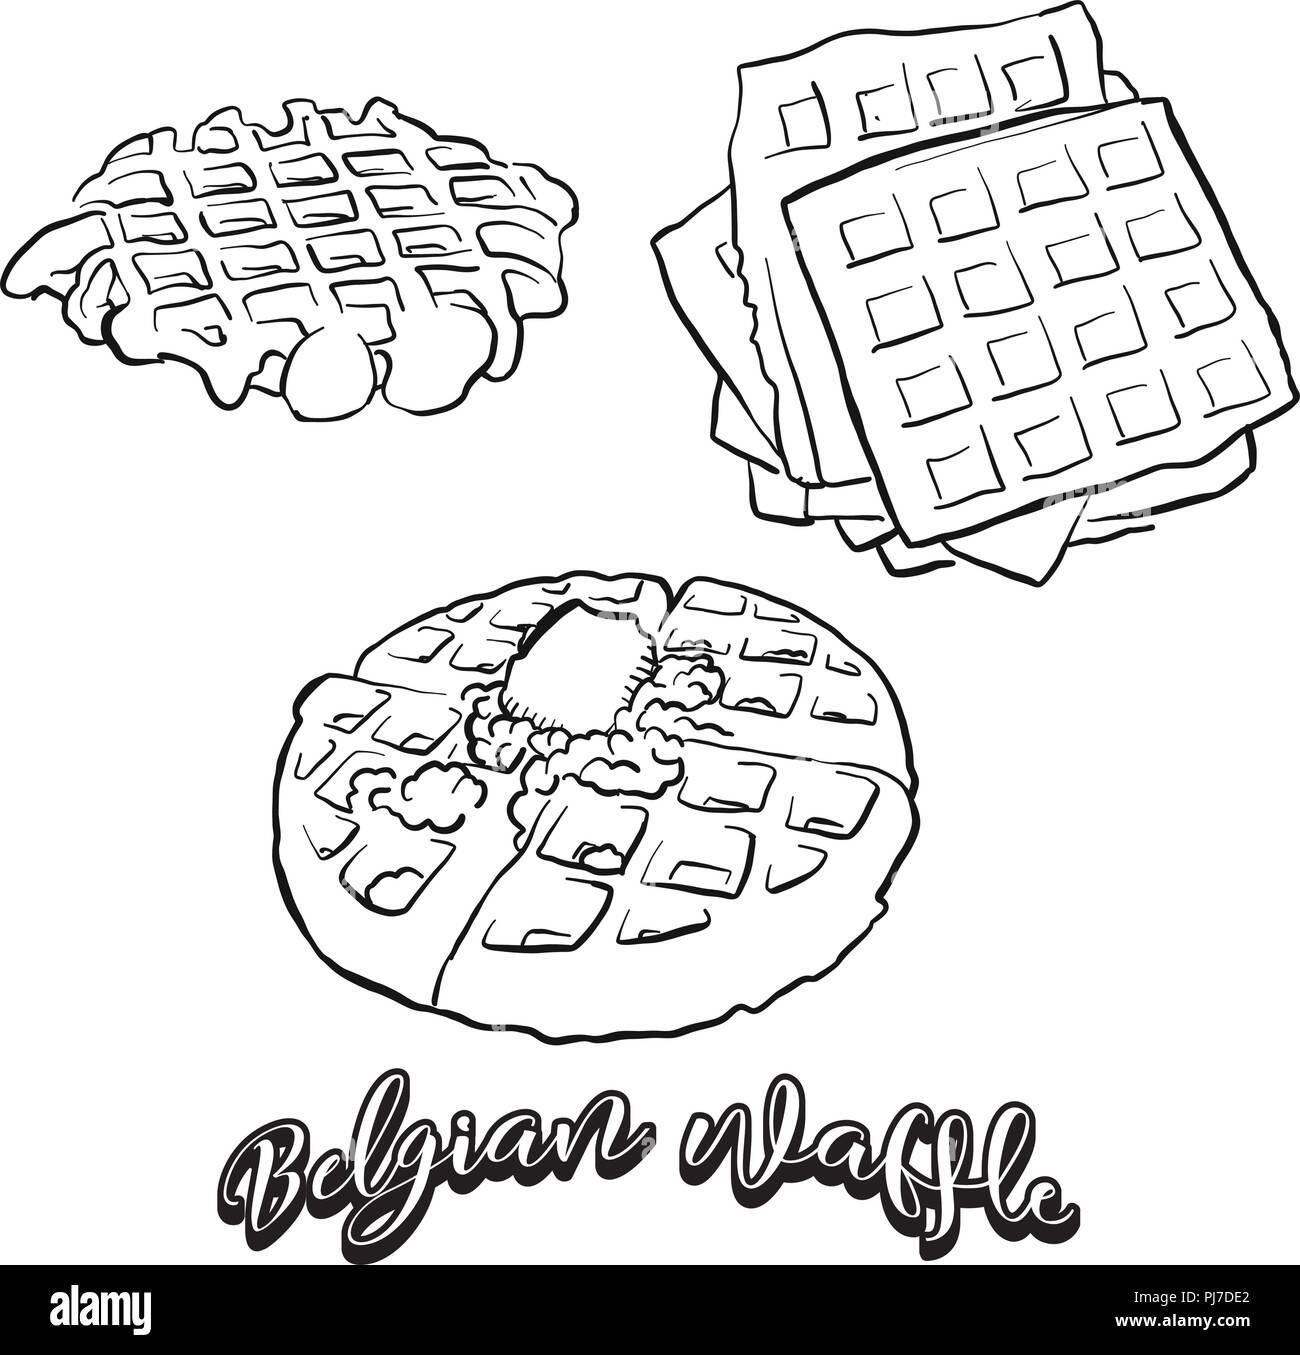 Hand Drawn Sketch Of Belgian Waffle Bread Vector Drawing Of Waffle Food Usually Known In Belgium Bread Illustration Series Stock Vector Image Art Alamy